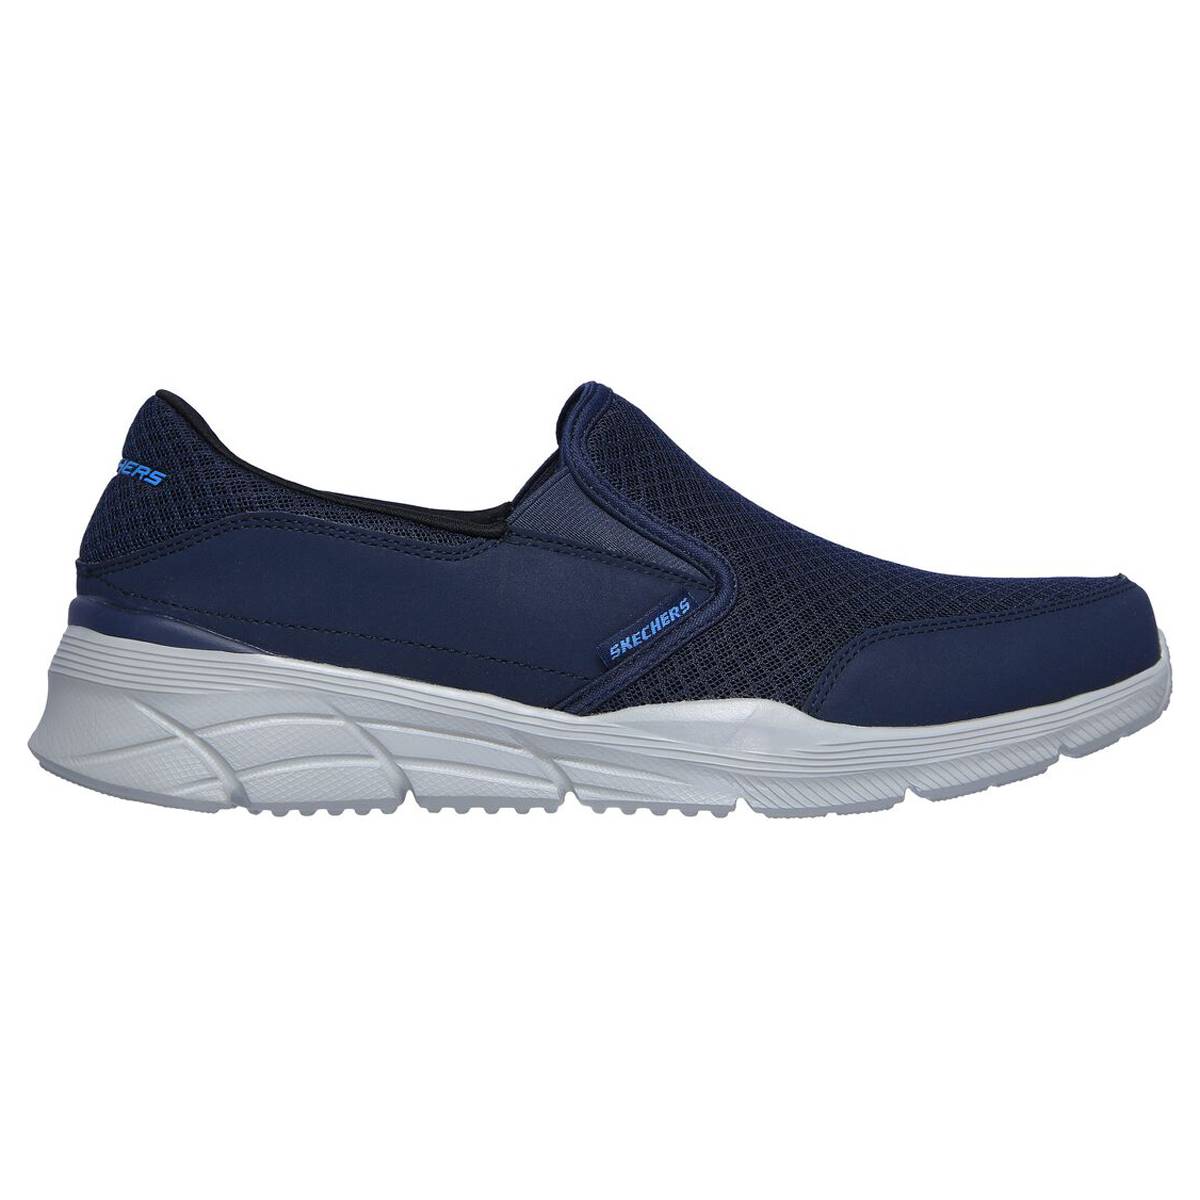 Mens Skechers Equalizer 4.0 Persisting Slip On Fashion Sneakers